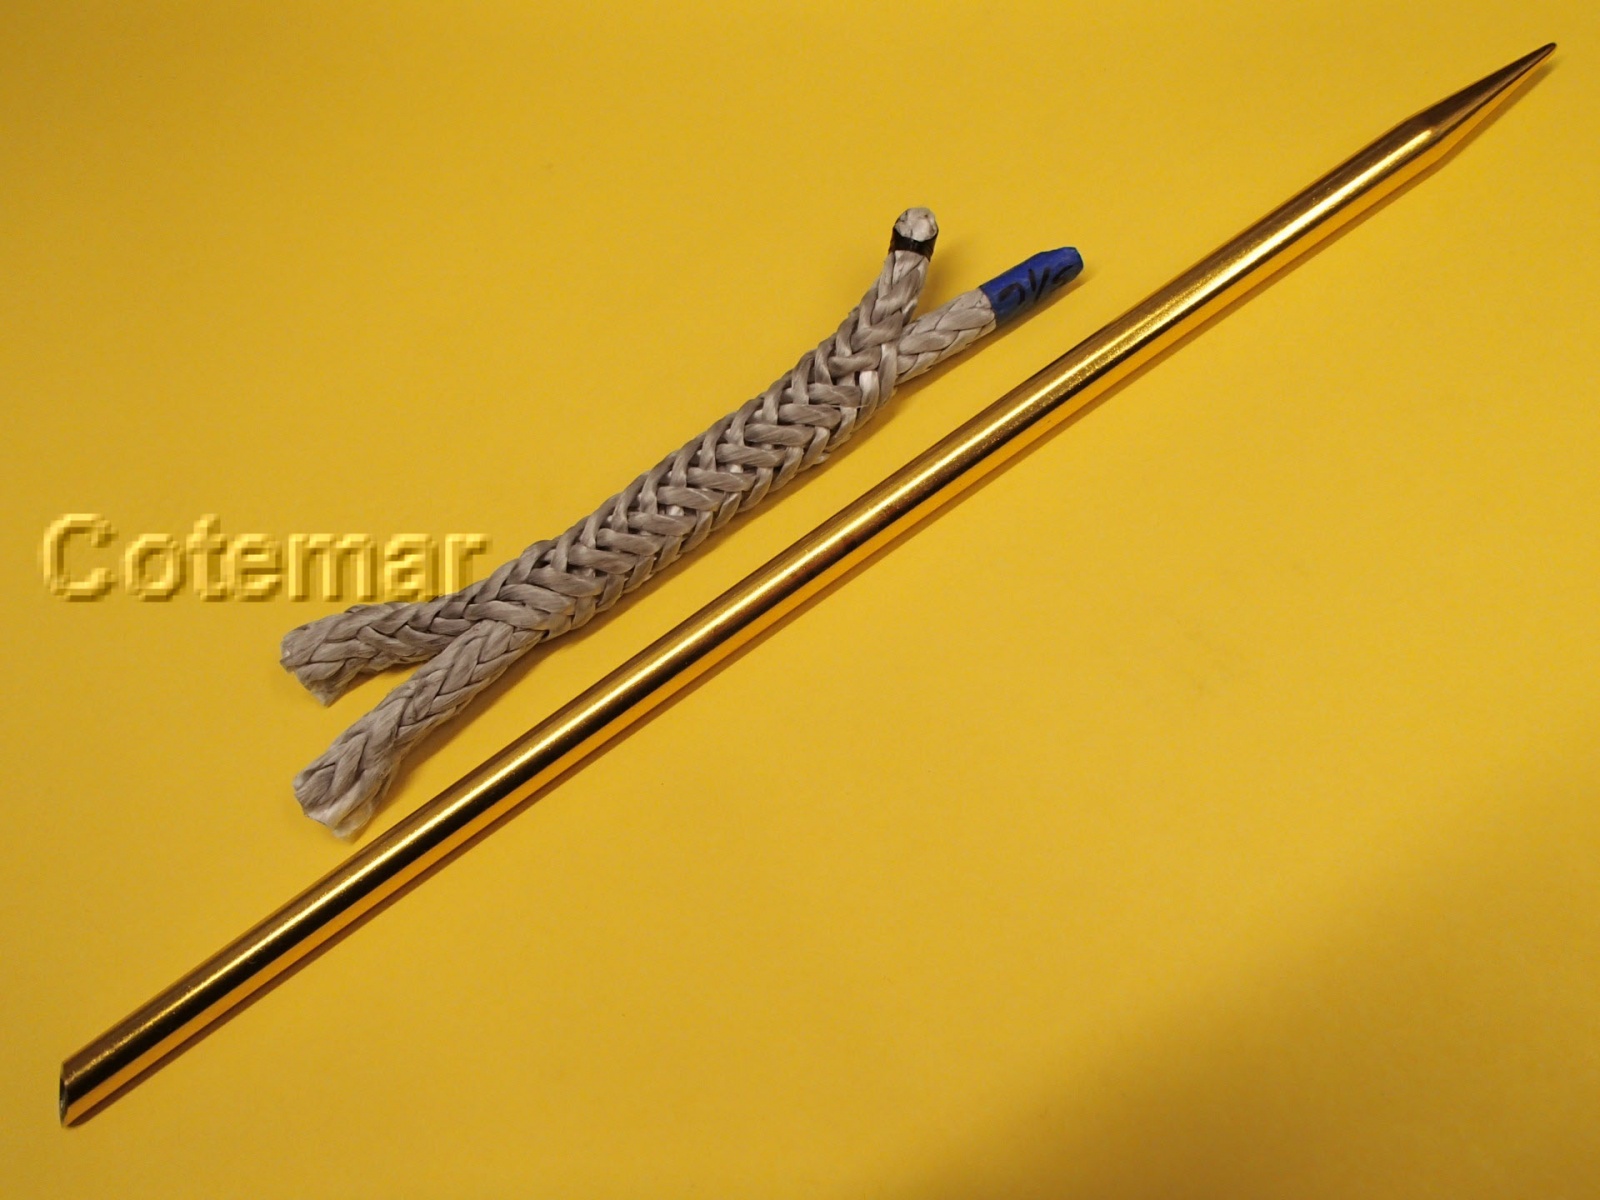 Stainless Steel Splicing Needle (Fid) - McLaughlin